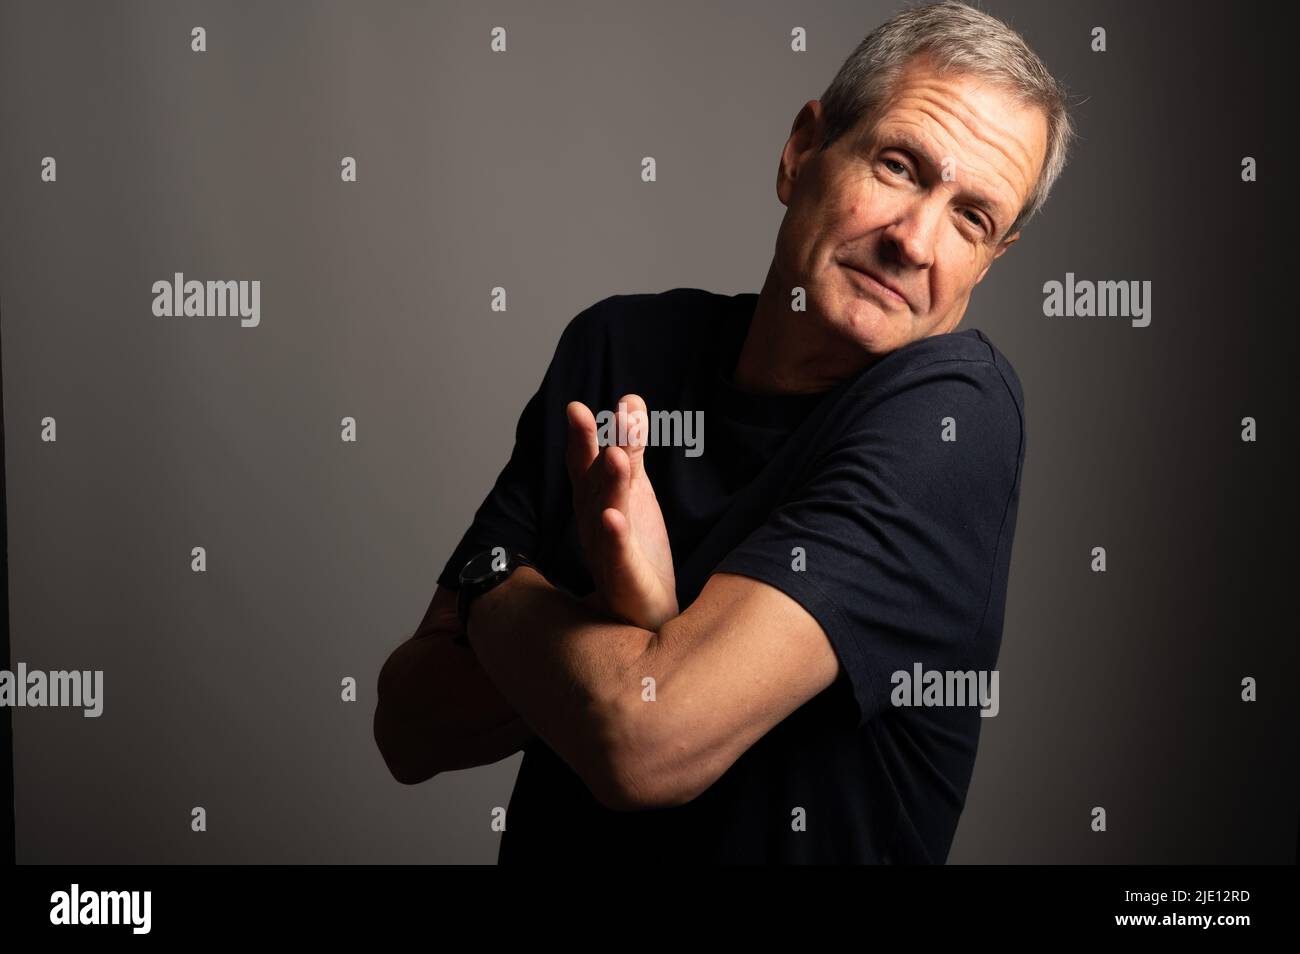 Mature man shrugging, on a grey background with copy space Stock Photo